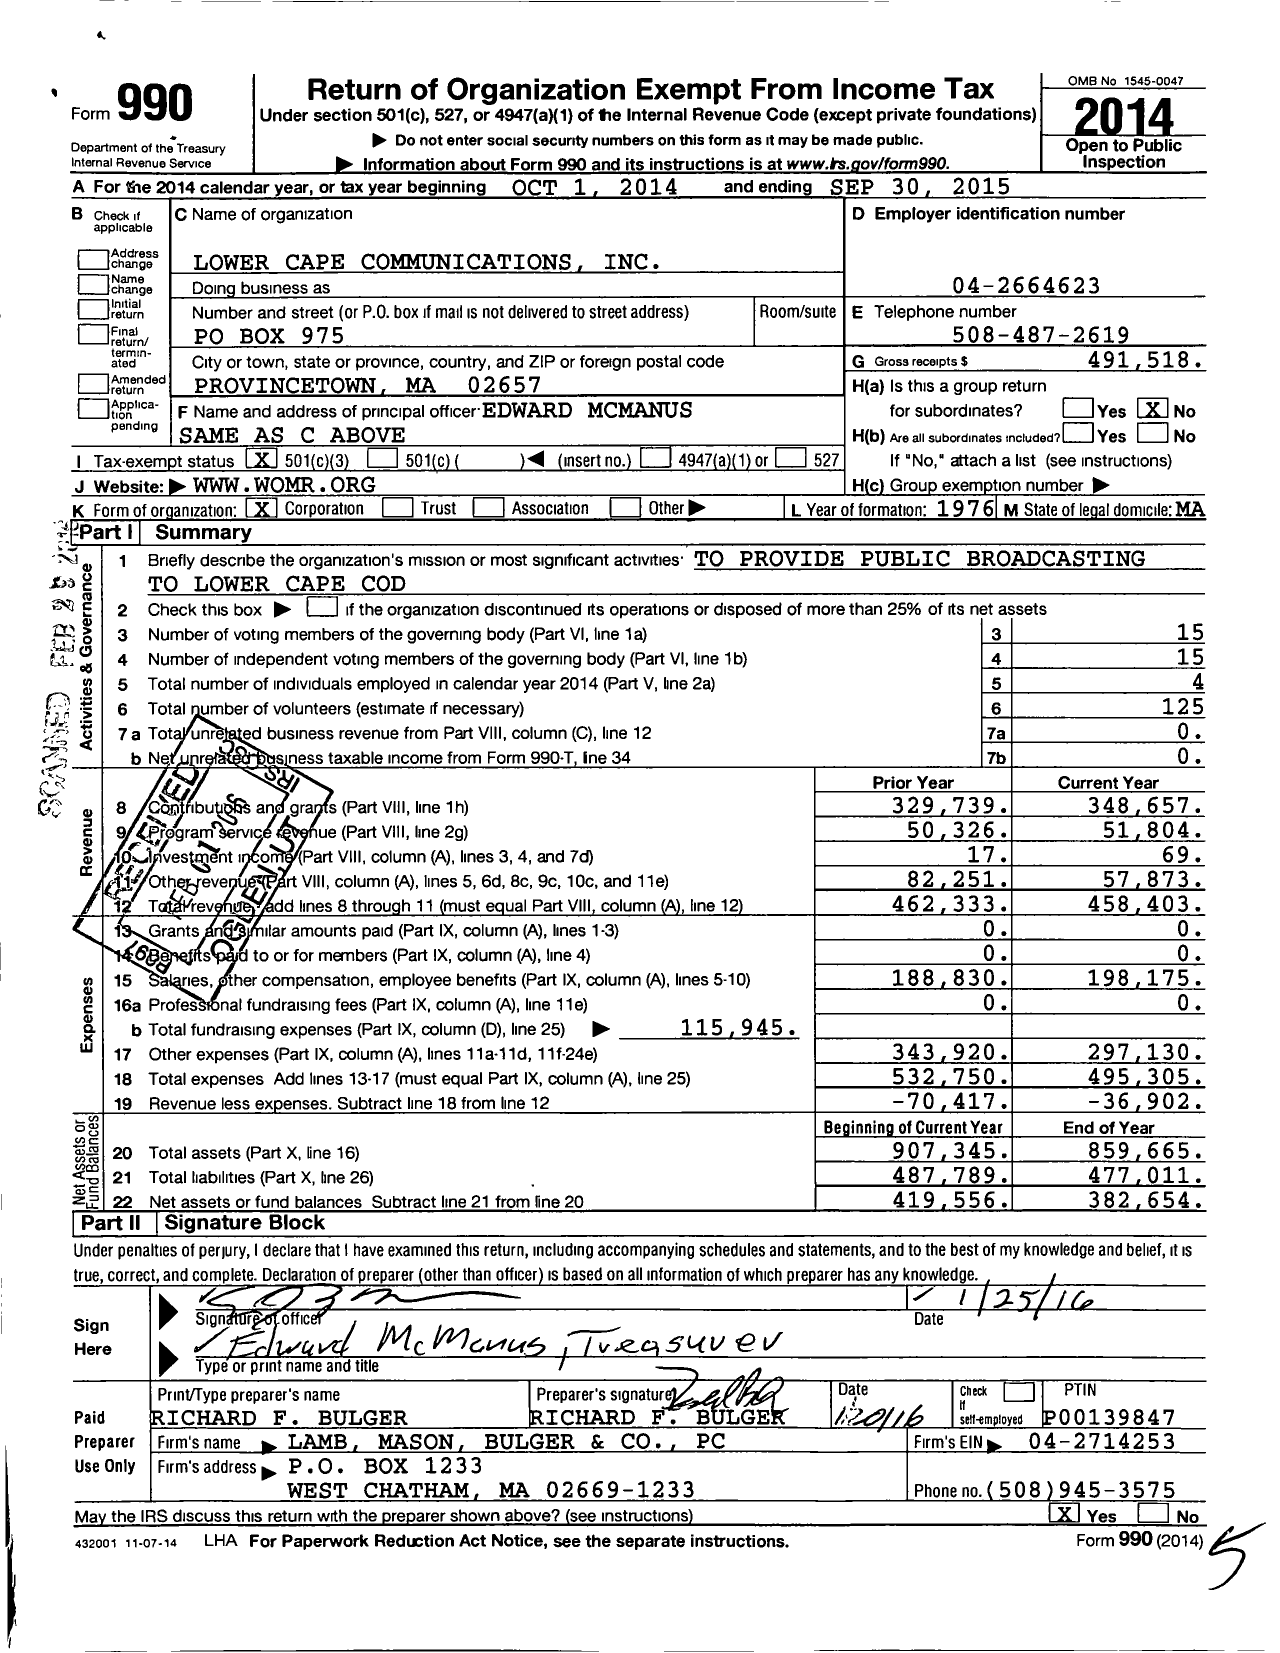 Image of first page of 2014 Form 990 for Lower Cape Communications